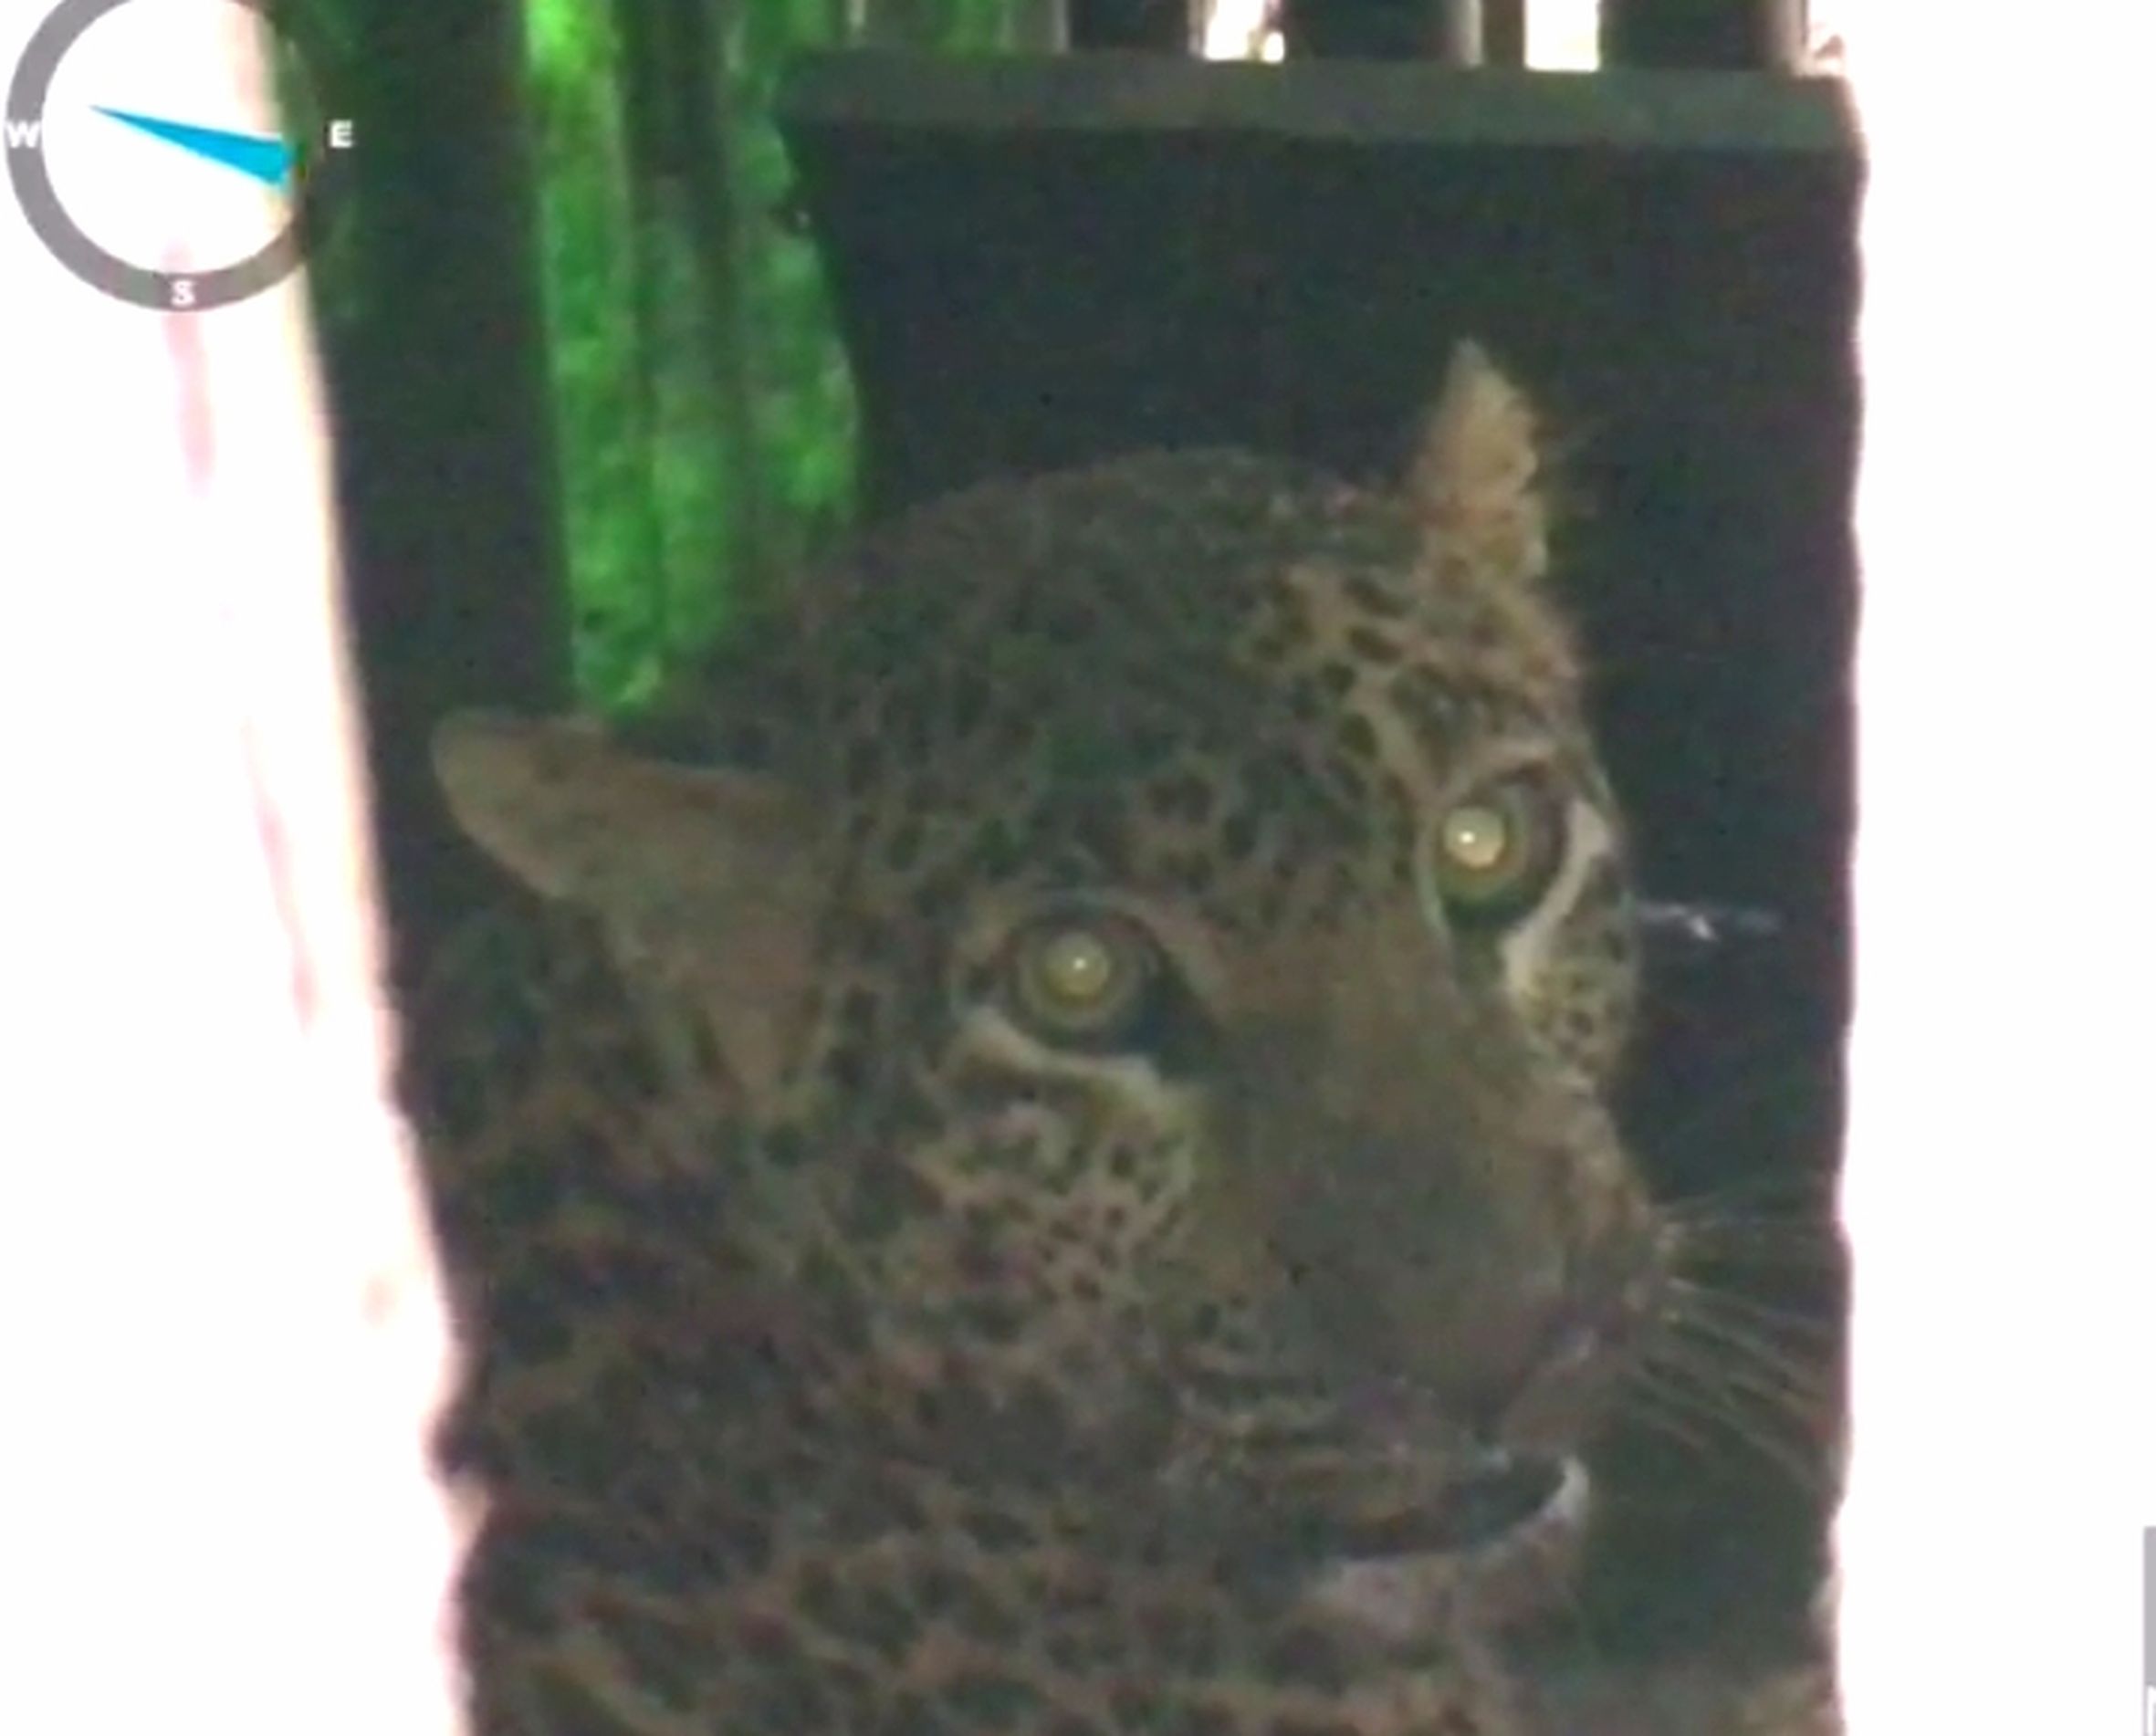 Leopard caught in a cage